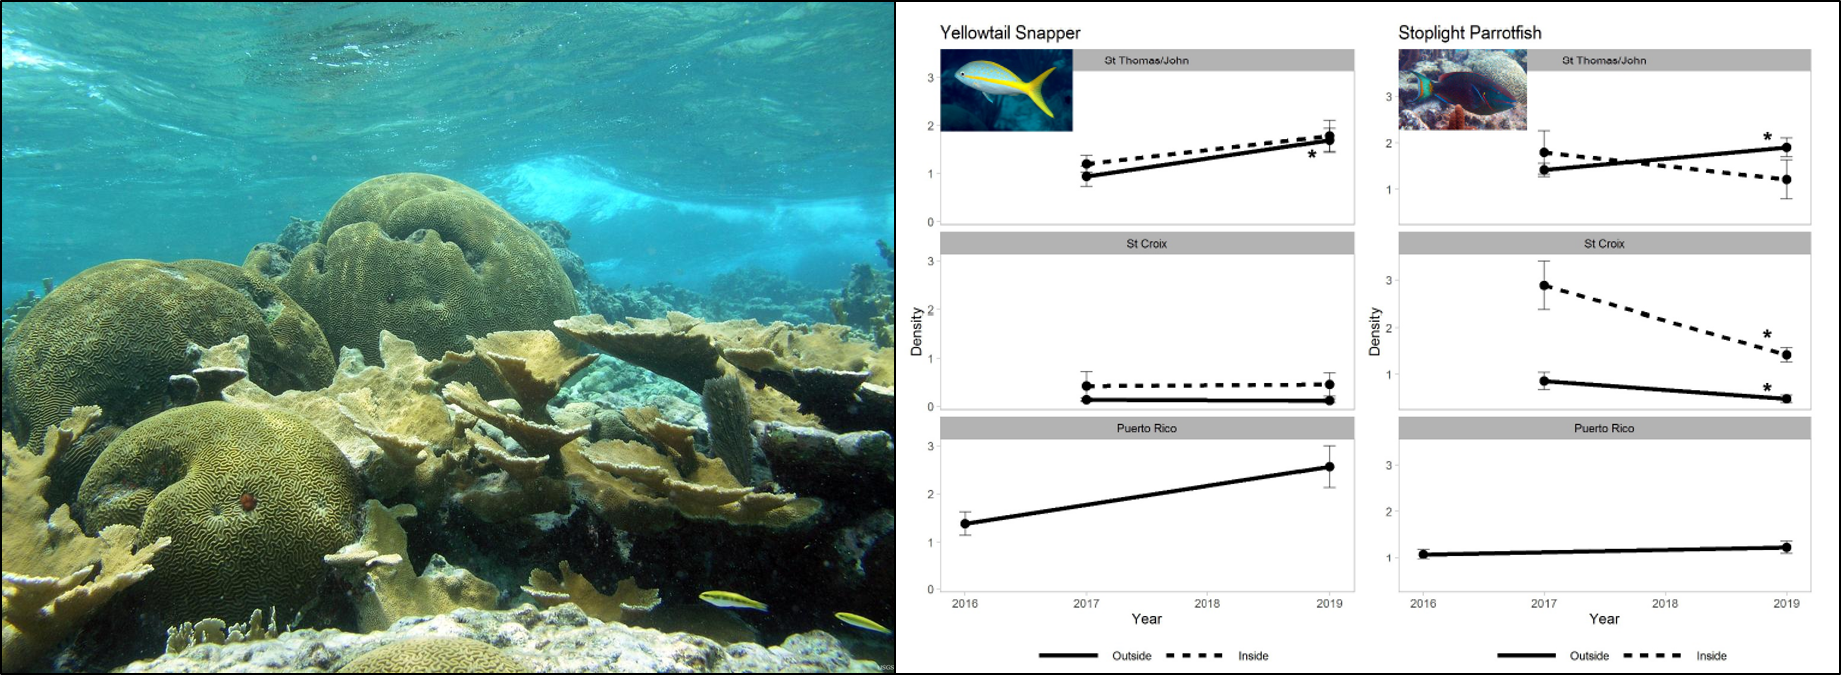 USVI corals (left) - Graph showing fish density changes by site/year (right)